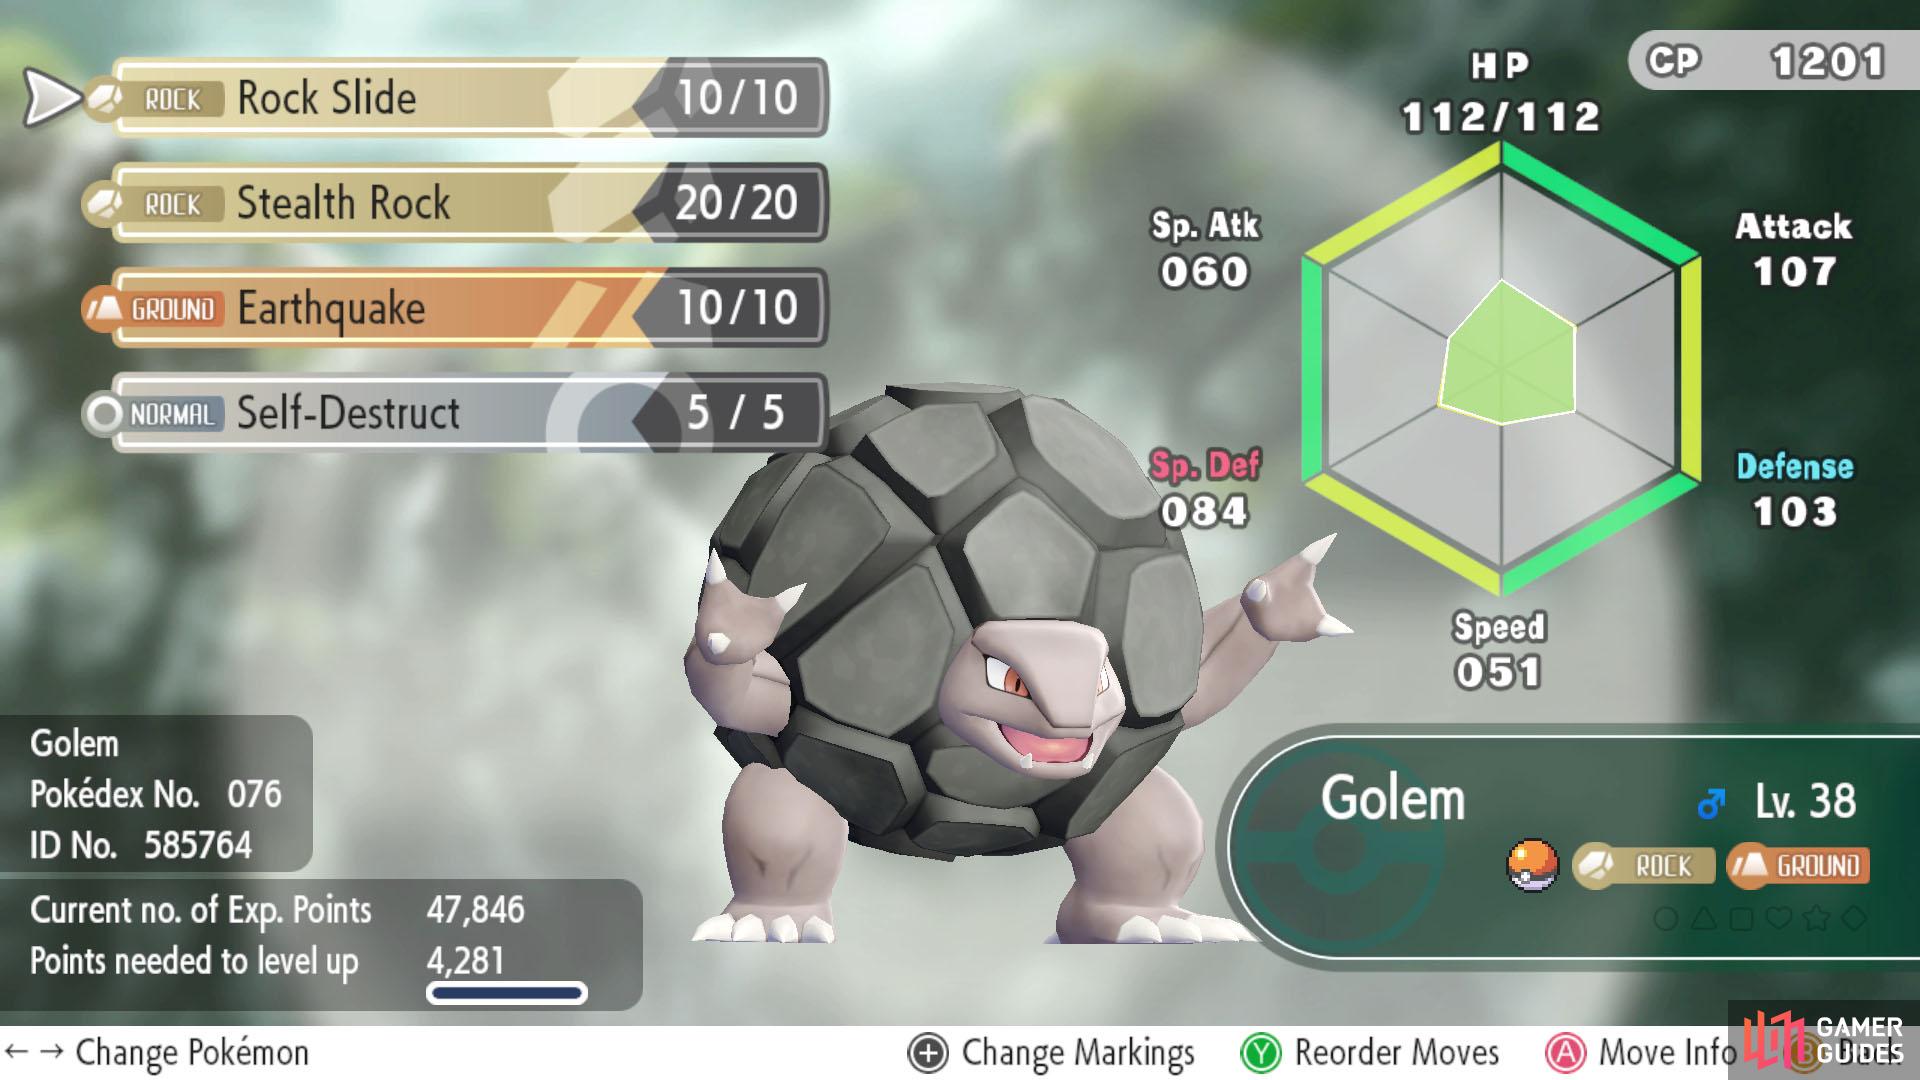 Golem generally have high defensive stats, but low Speed.